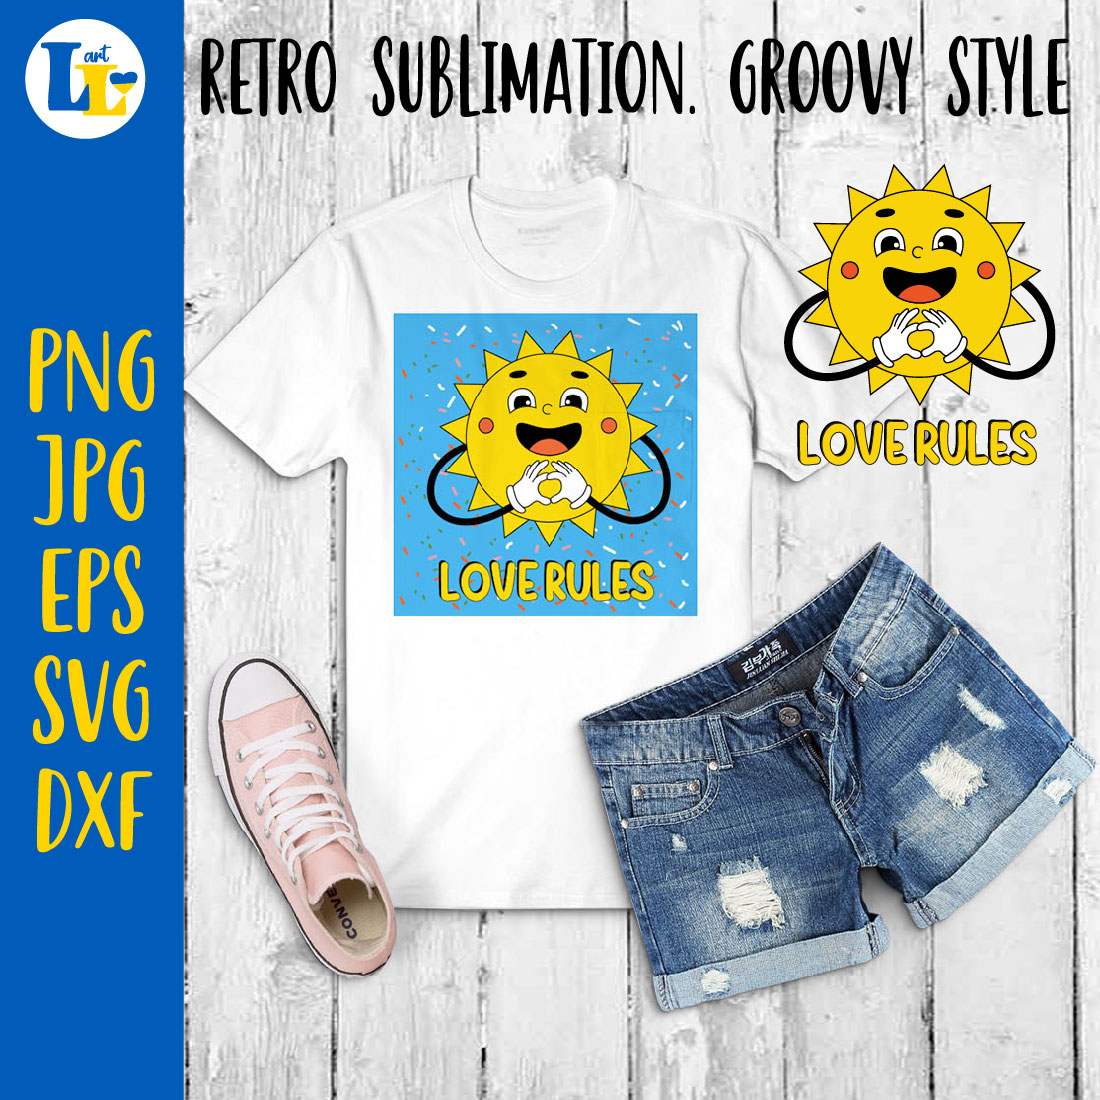 Love rules. Positive Retro Sublimation. Cute Groovy Sun cover image.